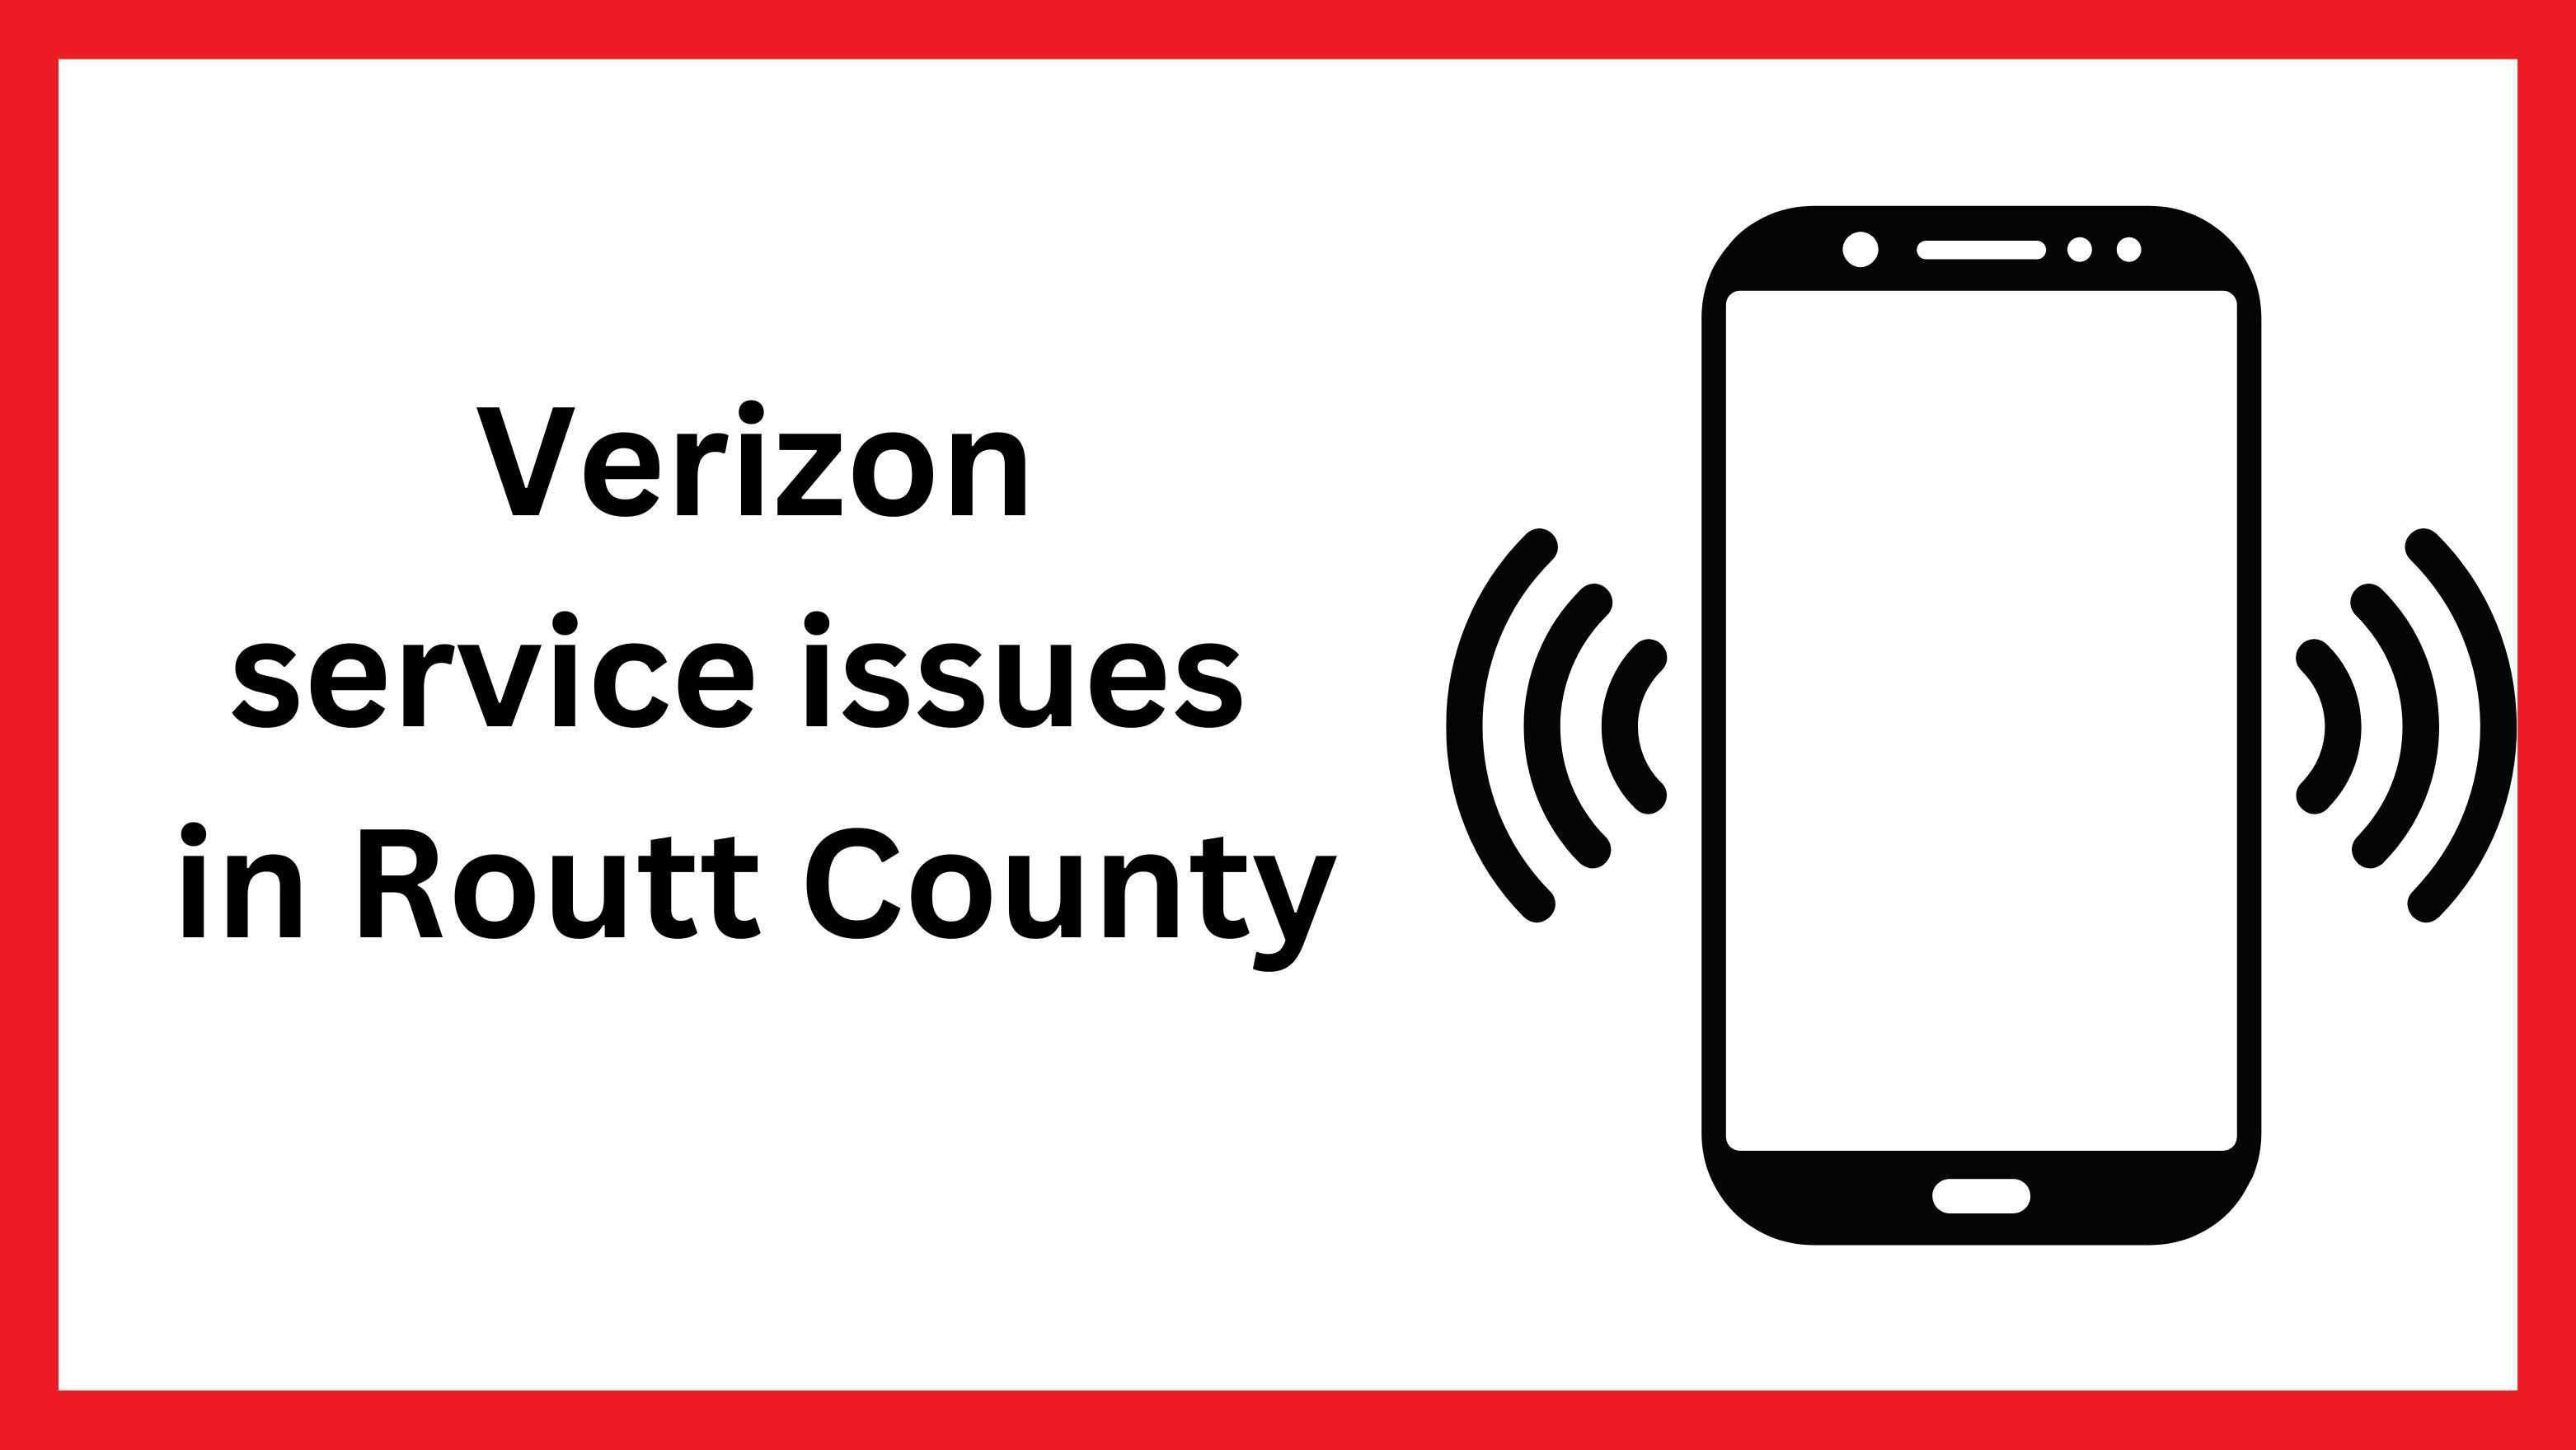 verizon-service-issues-in-routt-county